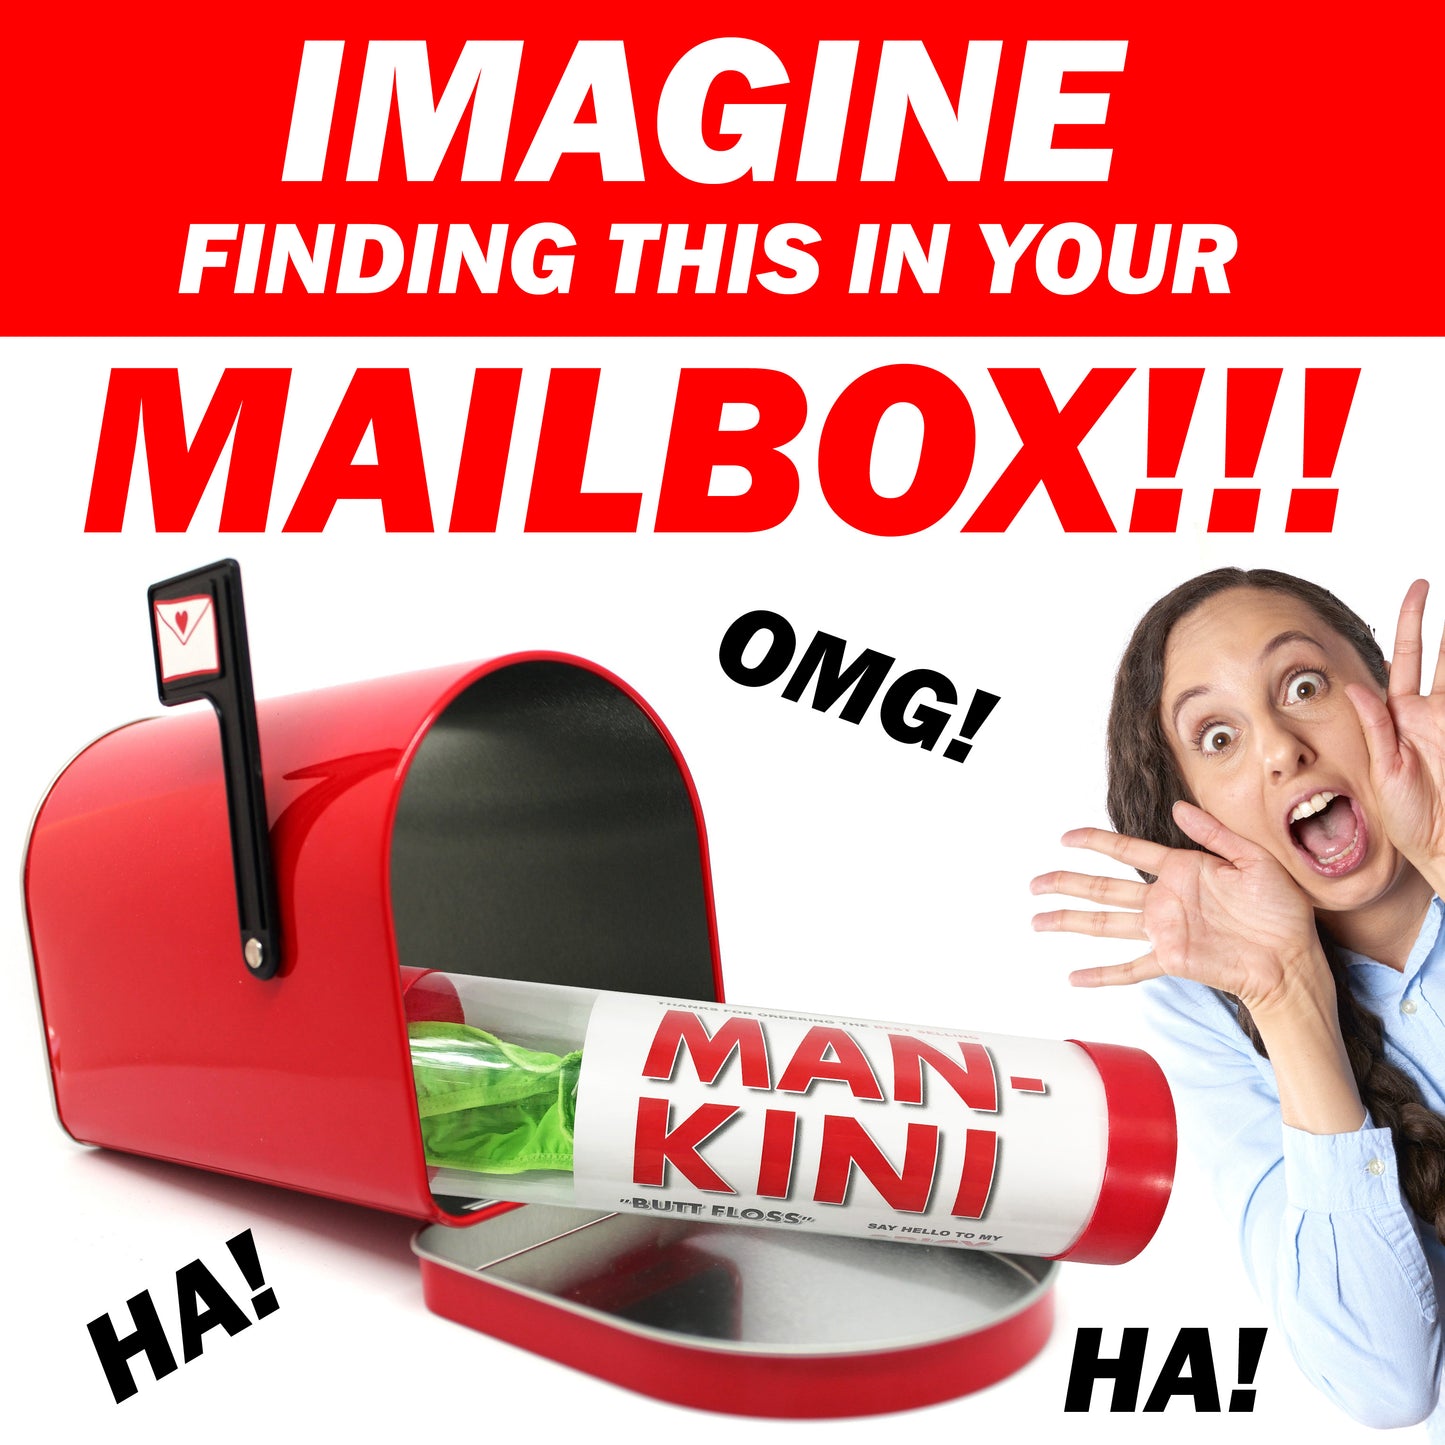 Mankini embarrassing clear prank tube gets mailed directly to your victims 100% anonymously!